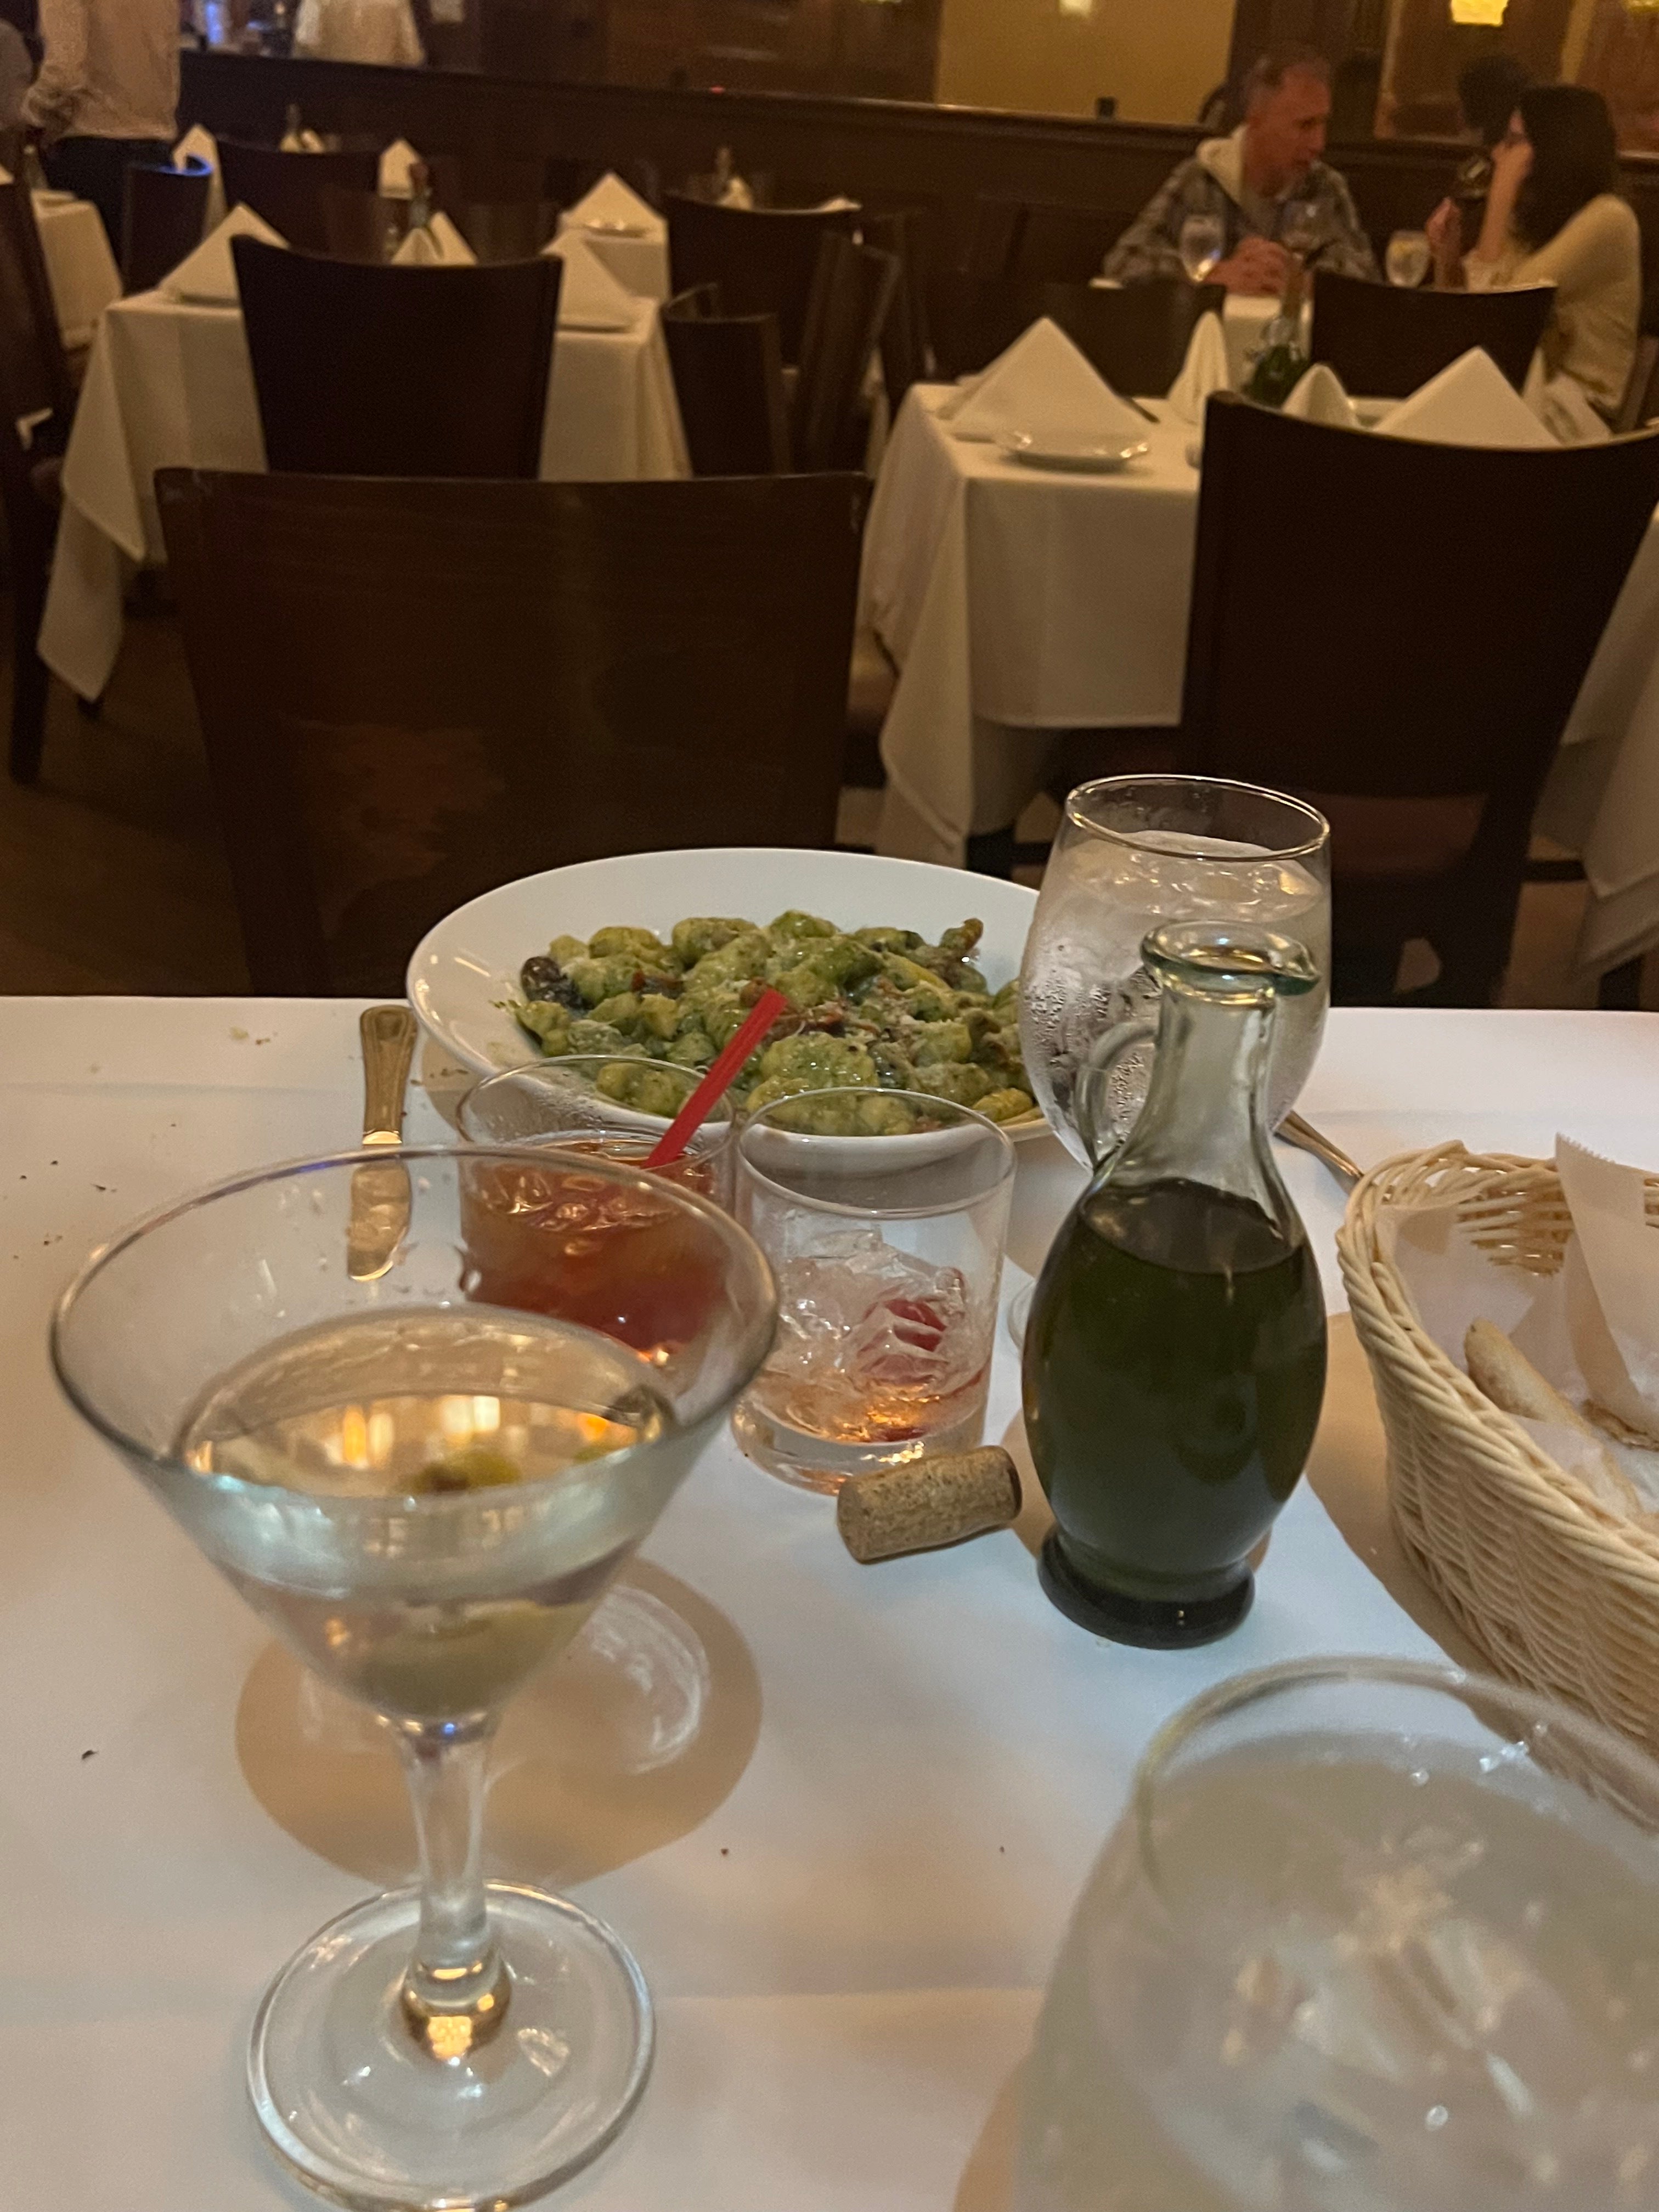 A photo of pasta and martini on a white table cloth.